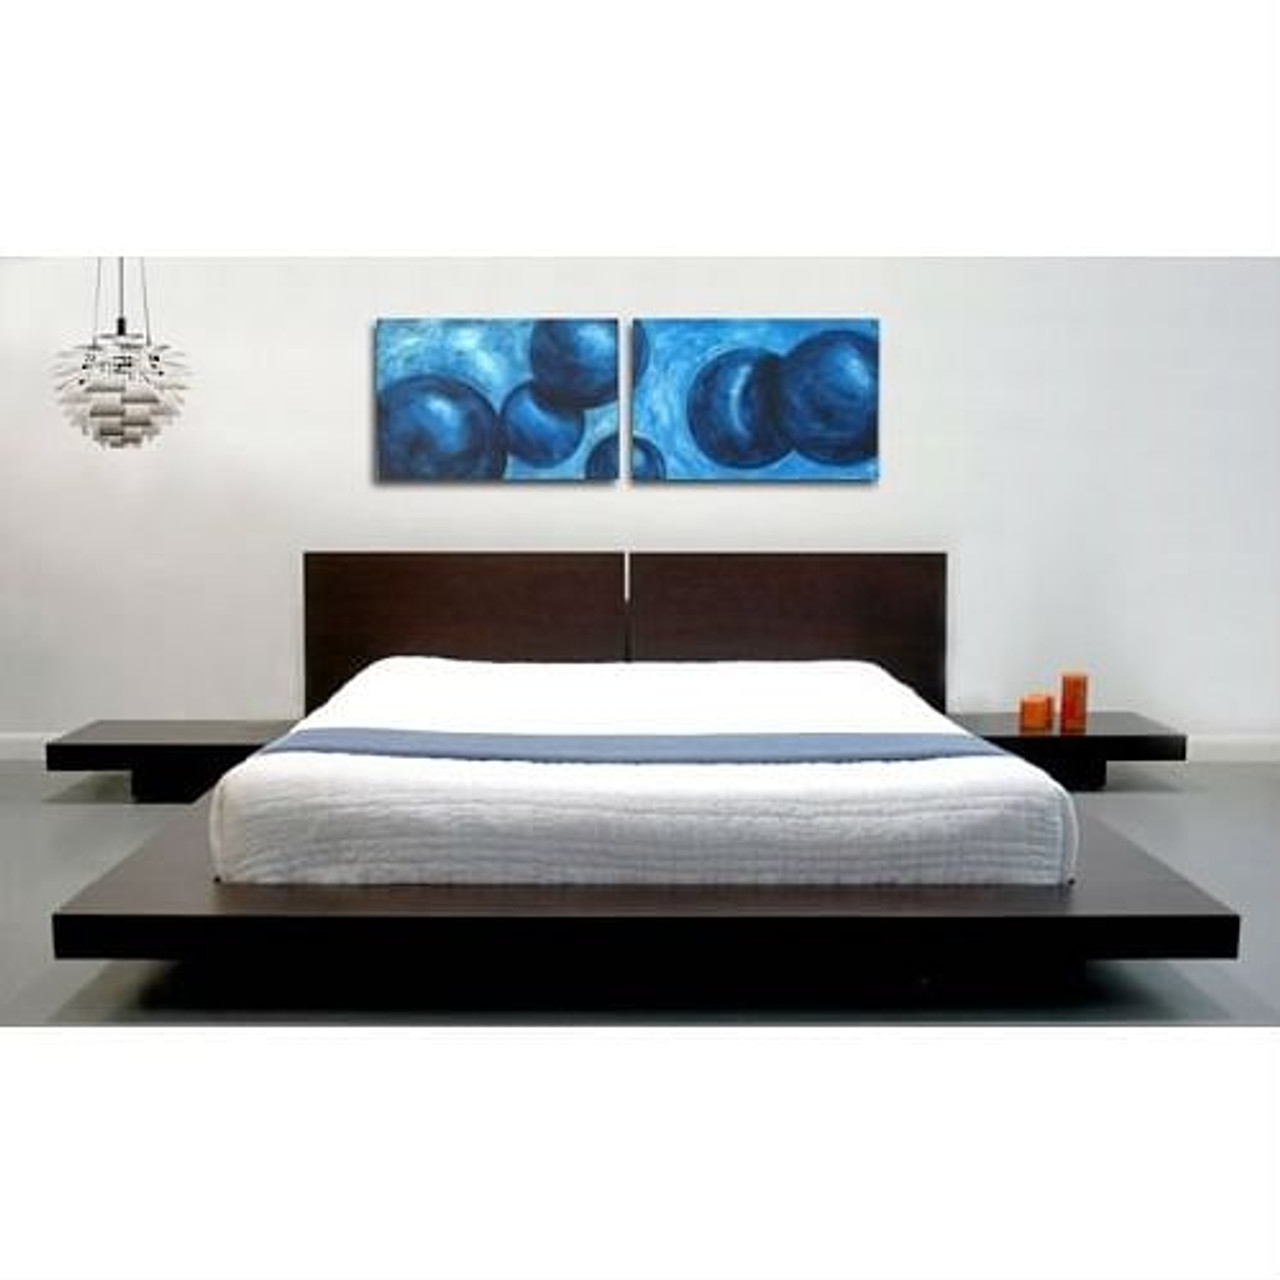 King Modern Japanese Style Platform Bed with Headboard and 2 Nightstands in Espresso